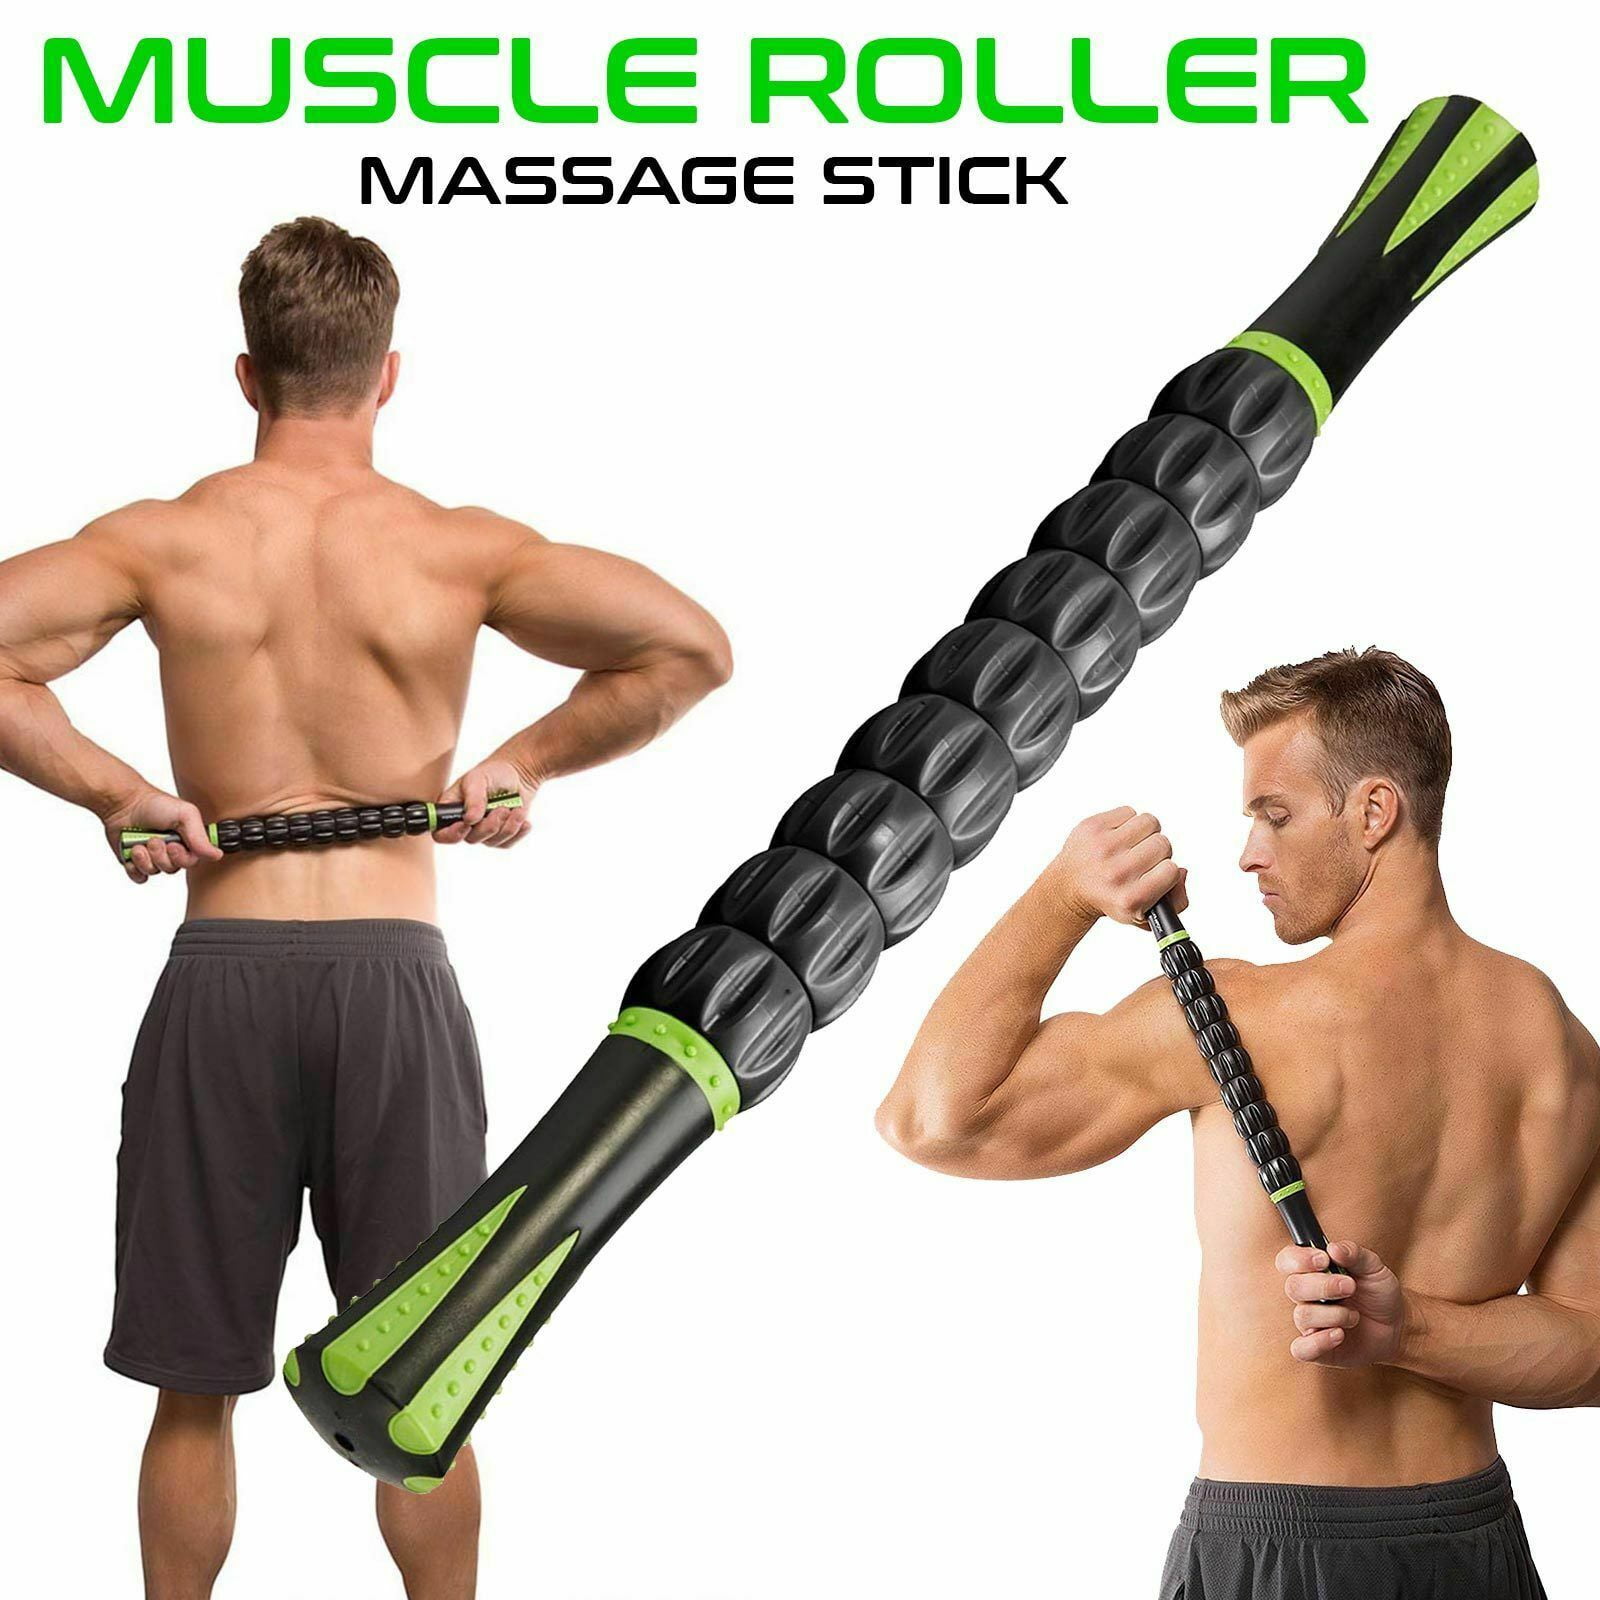 Dodoing Muscle Roller Massage Stick For Athletes Sports And Physical Therapy Recovery Leg Arms